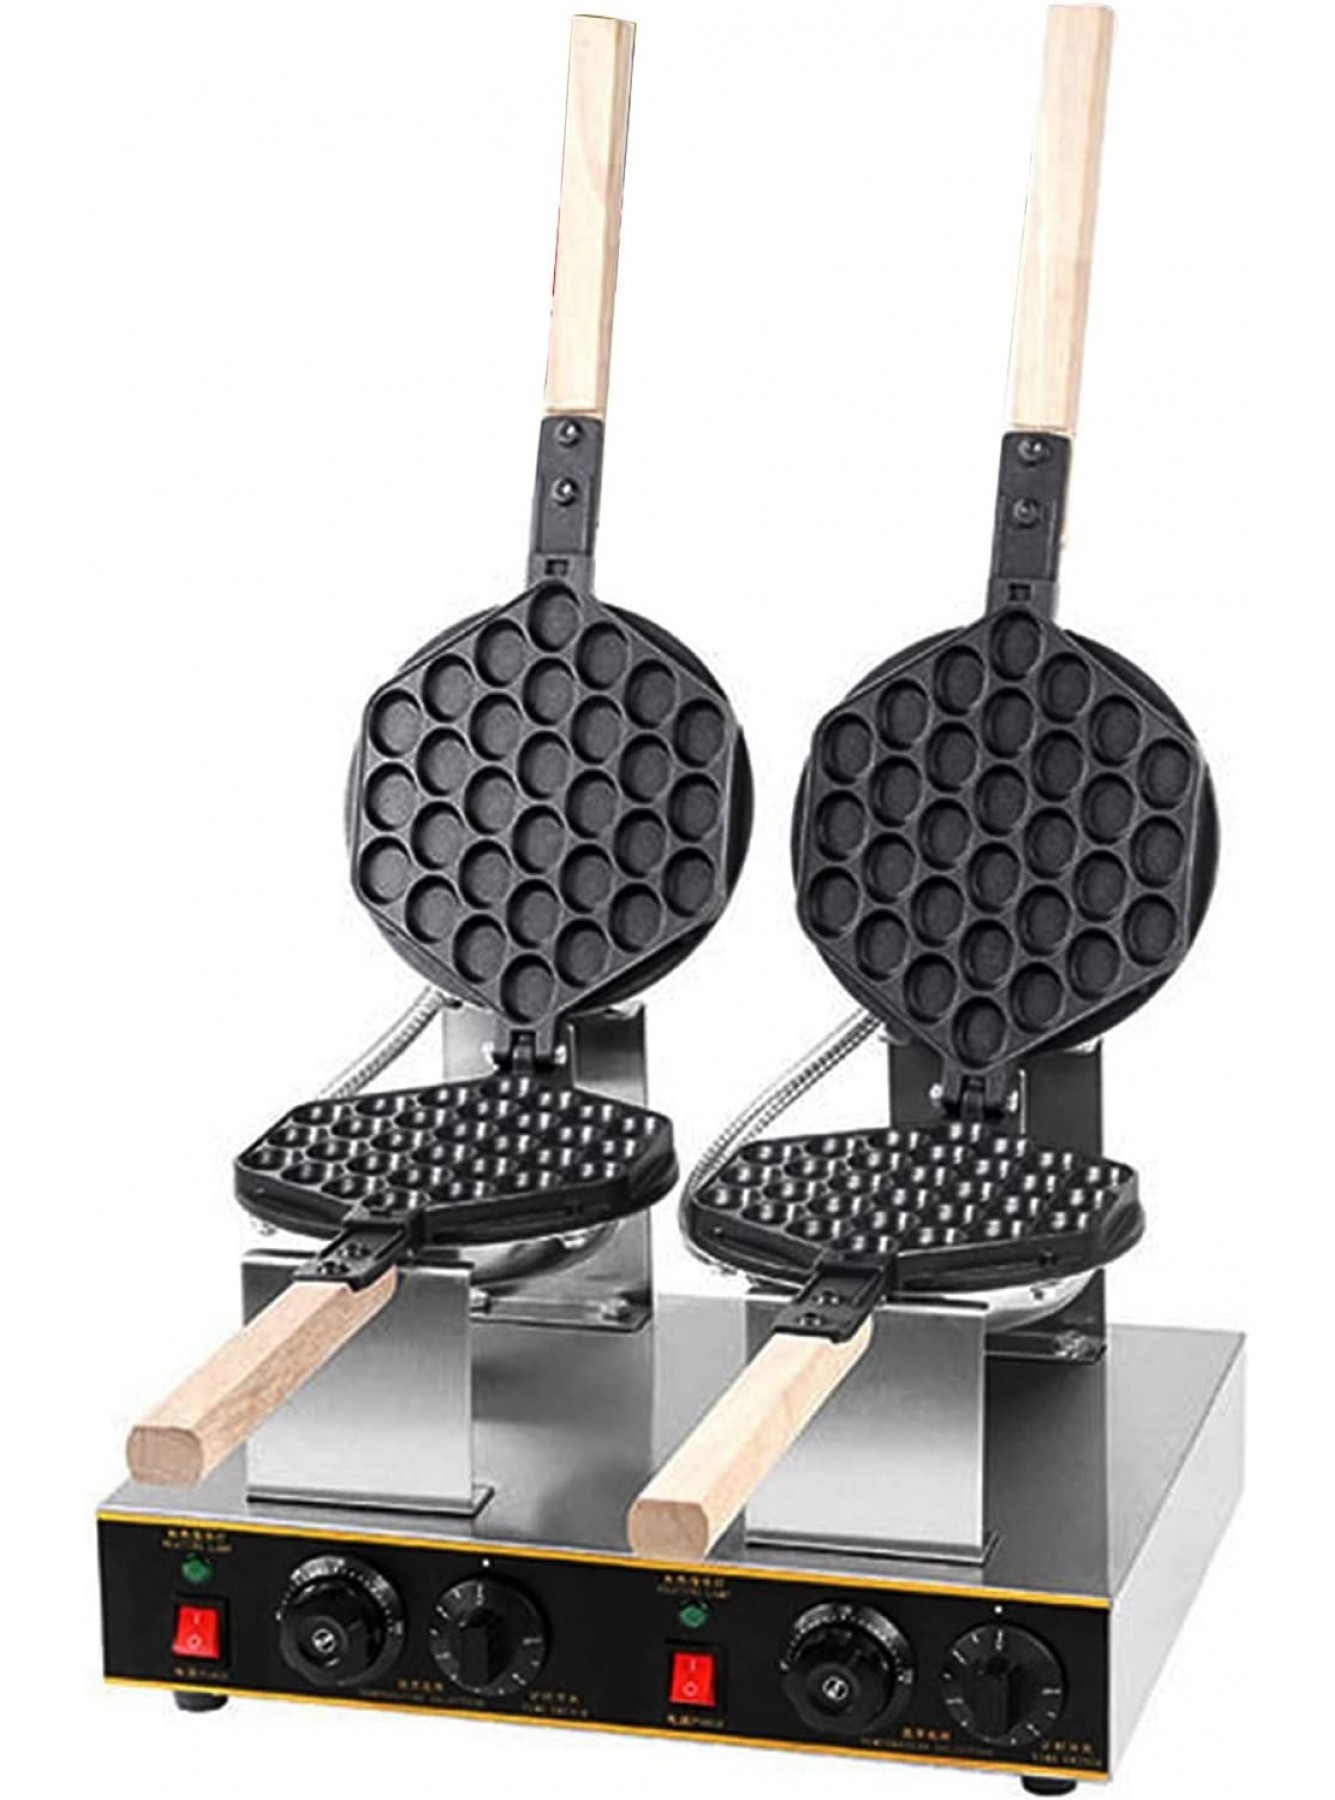 Commercial Bubble Waffle Maker 1400W Electric Non-Stick Pan Stainless Steel Egg Waffle Maker 30pcs Egg 50-250°c 180 Degree Rotating Cake Bubble Waffle Machines for Home and Commercial Use B0B461M2CC